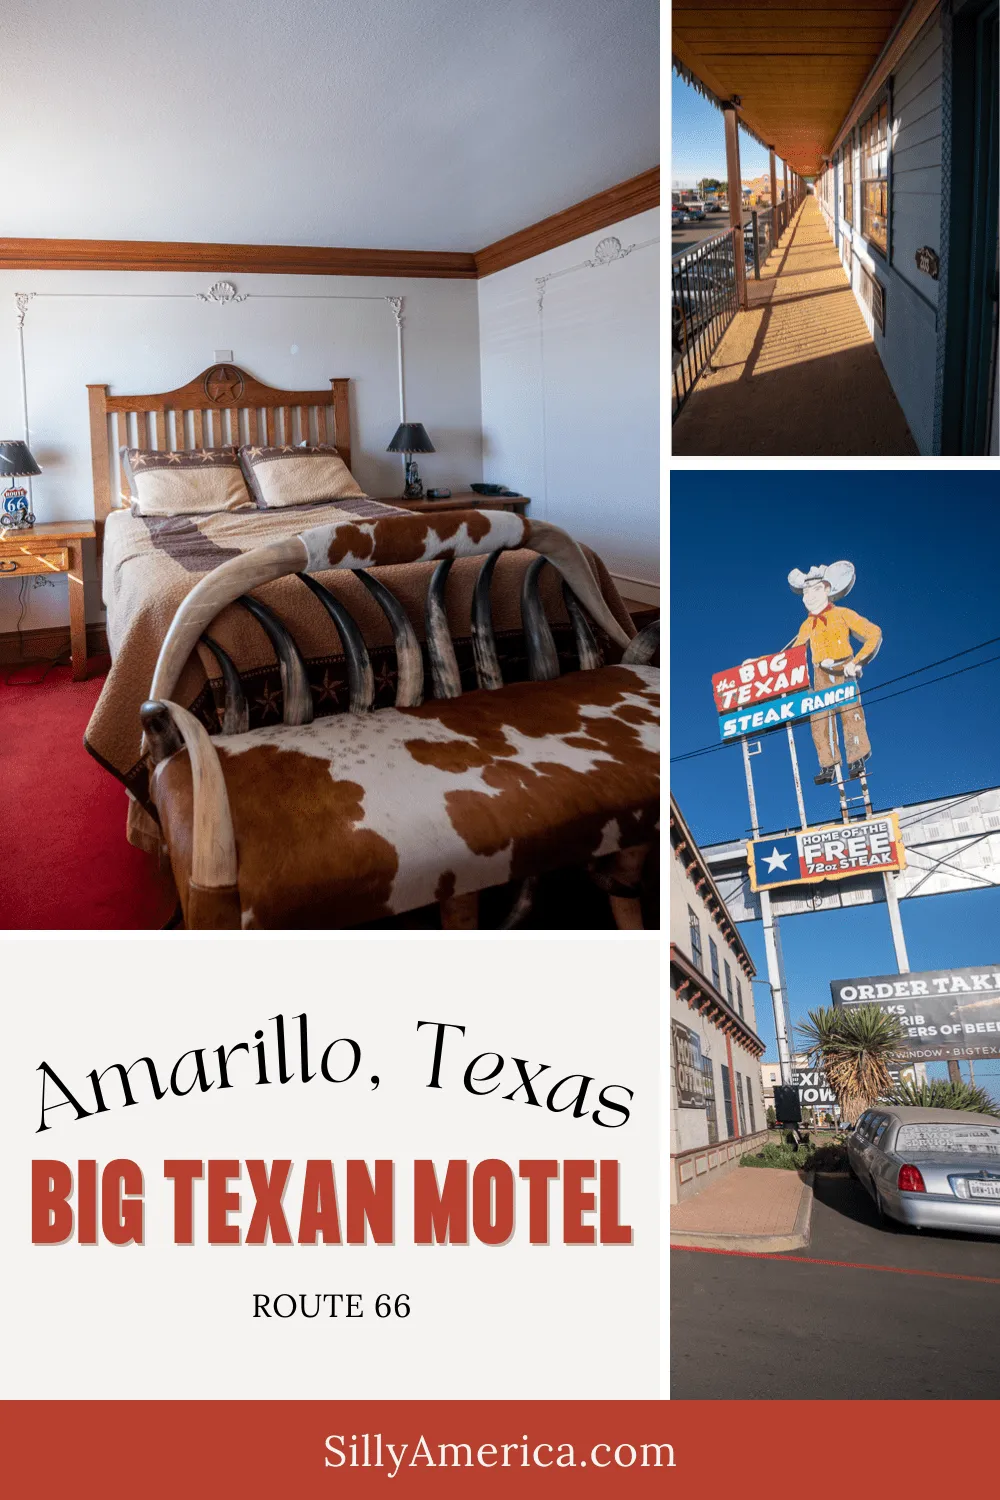 In a food coma after polishing off a 72-ounce steak challenge at the Big Texan Steakhouse? Need to sleep it off? I know just the place. If you're looking for unique accommodation on Route 66 look no further than the Big Texan Motel in Amarillo, Texas. Stay next to the famous steakhouse on your Route 66 road trip.  #RoadTrips #RoadTripStop #Route66 #Route66RoadTrip #TexasRoute66 #Texas #TexasRoadTrip #TexasRoadsideAttractions #RoadsideAttractions #RoadsideAttraction #RoadsideAmerica #RoadTrip